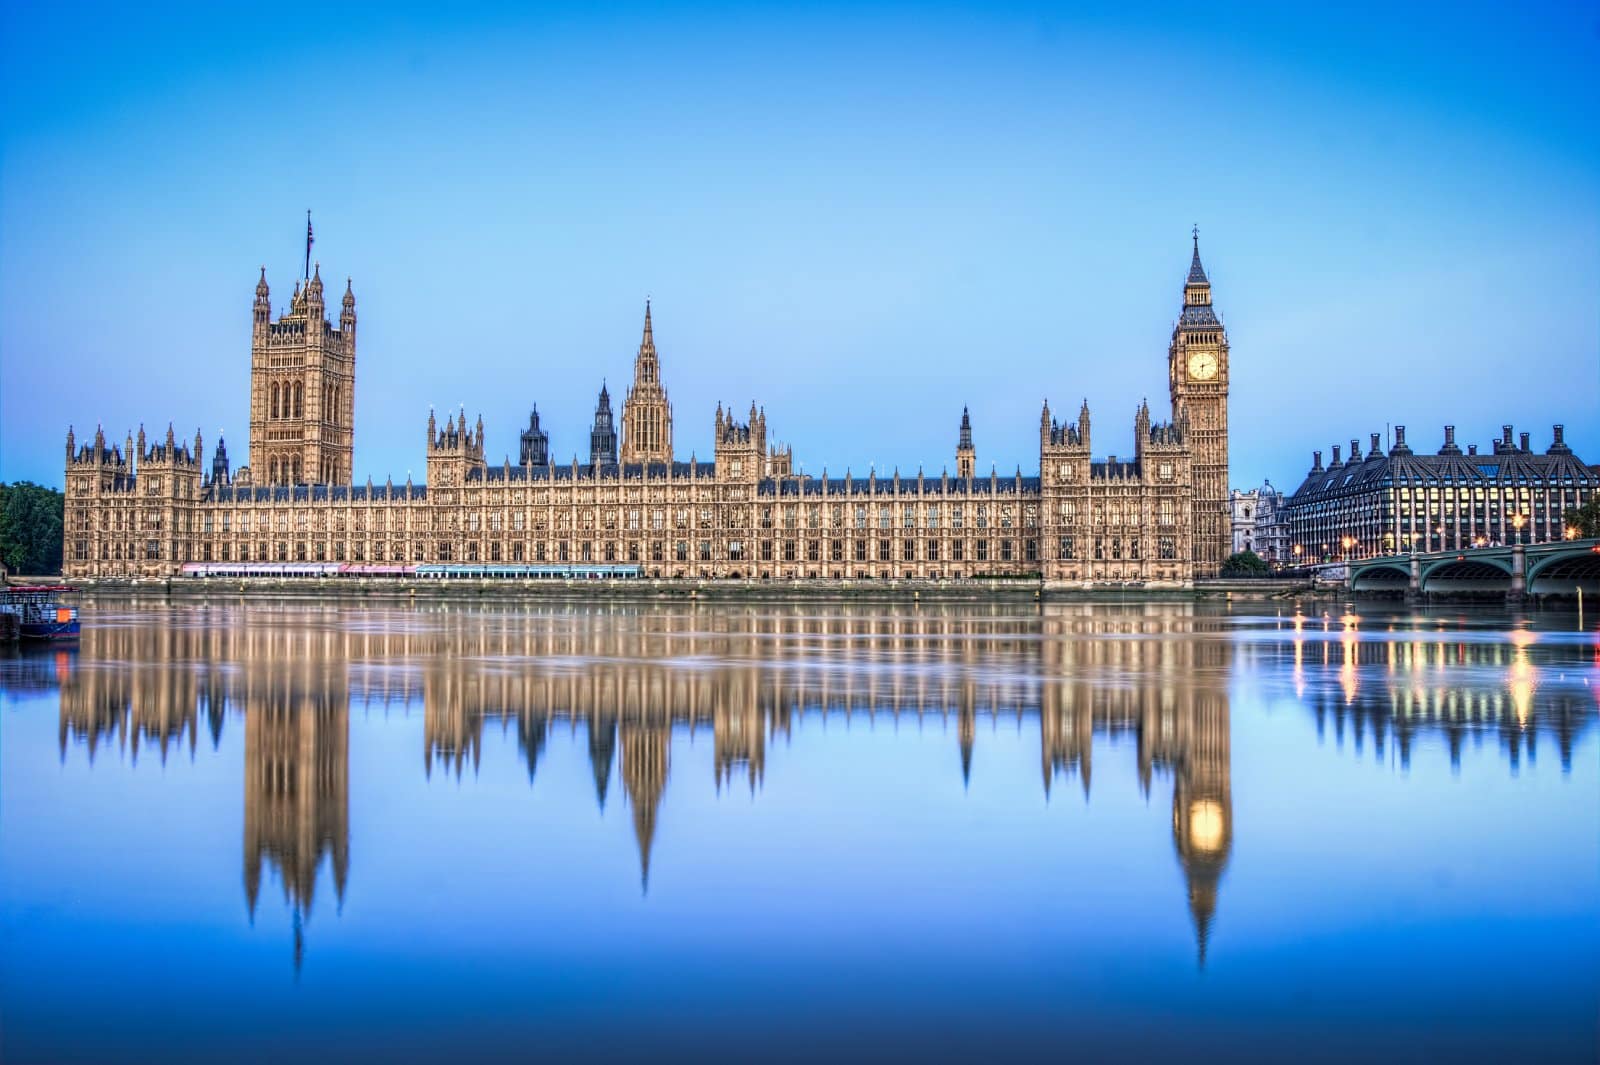 <p class="wp-caption-text">Image Credit: Shutterstock / olavs</p>  <p><span>The UK’s rich history and vibrant culture make it ideal for study or internships. While cities like London can be pricey, the experience of walking through history is priceless. Prepare for unpredictable weather and endless exploration.</span></p>